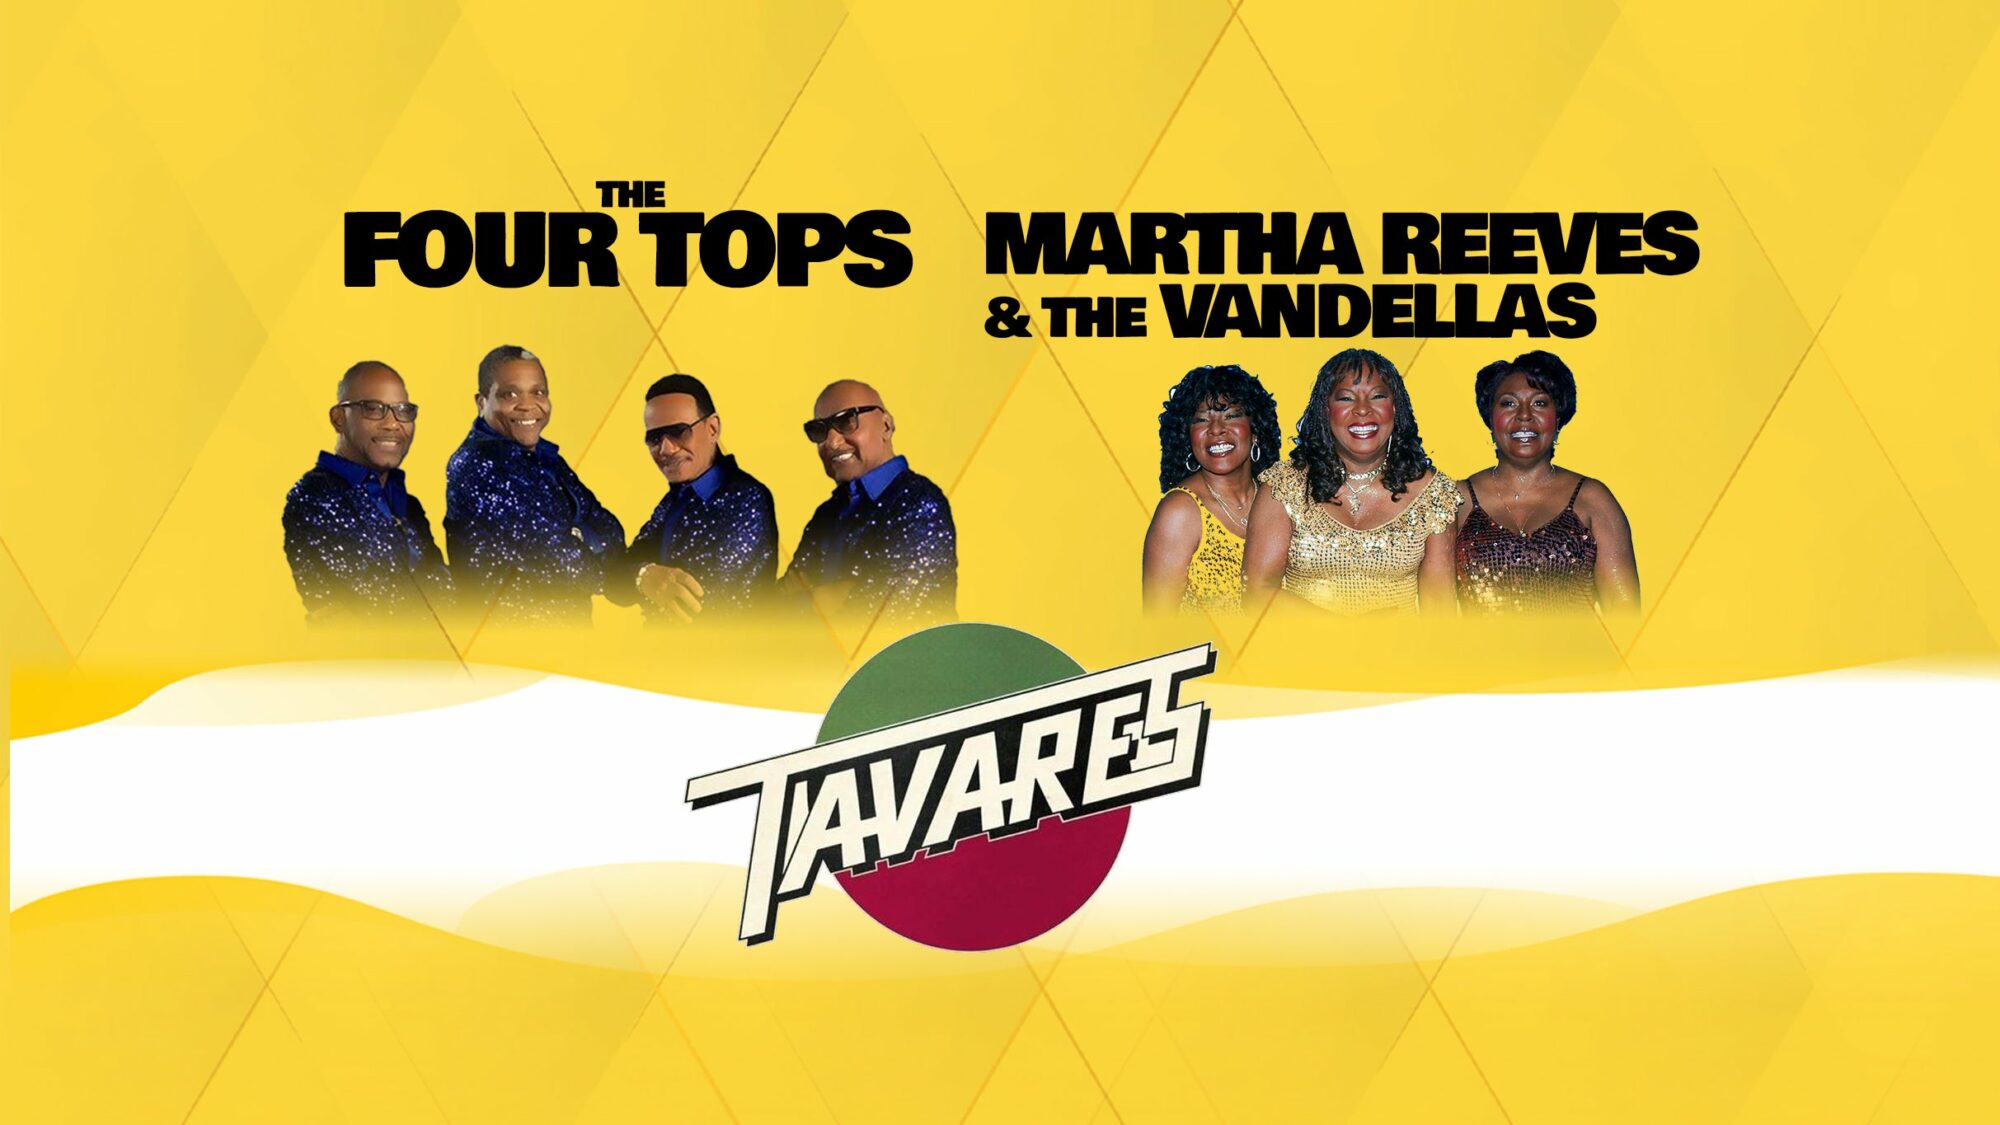 Image name The Four Tops Tavares Martha Reeves the Vandellas at Connexin Live Hull the 8 image from the post Events in Yorkshire.com.